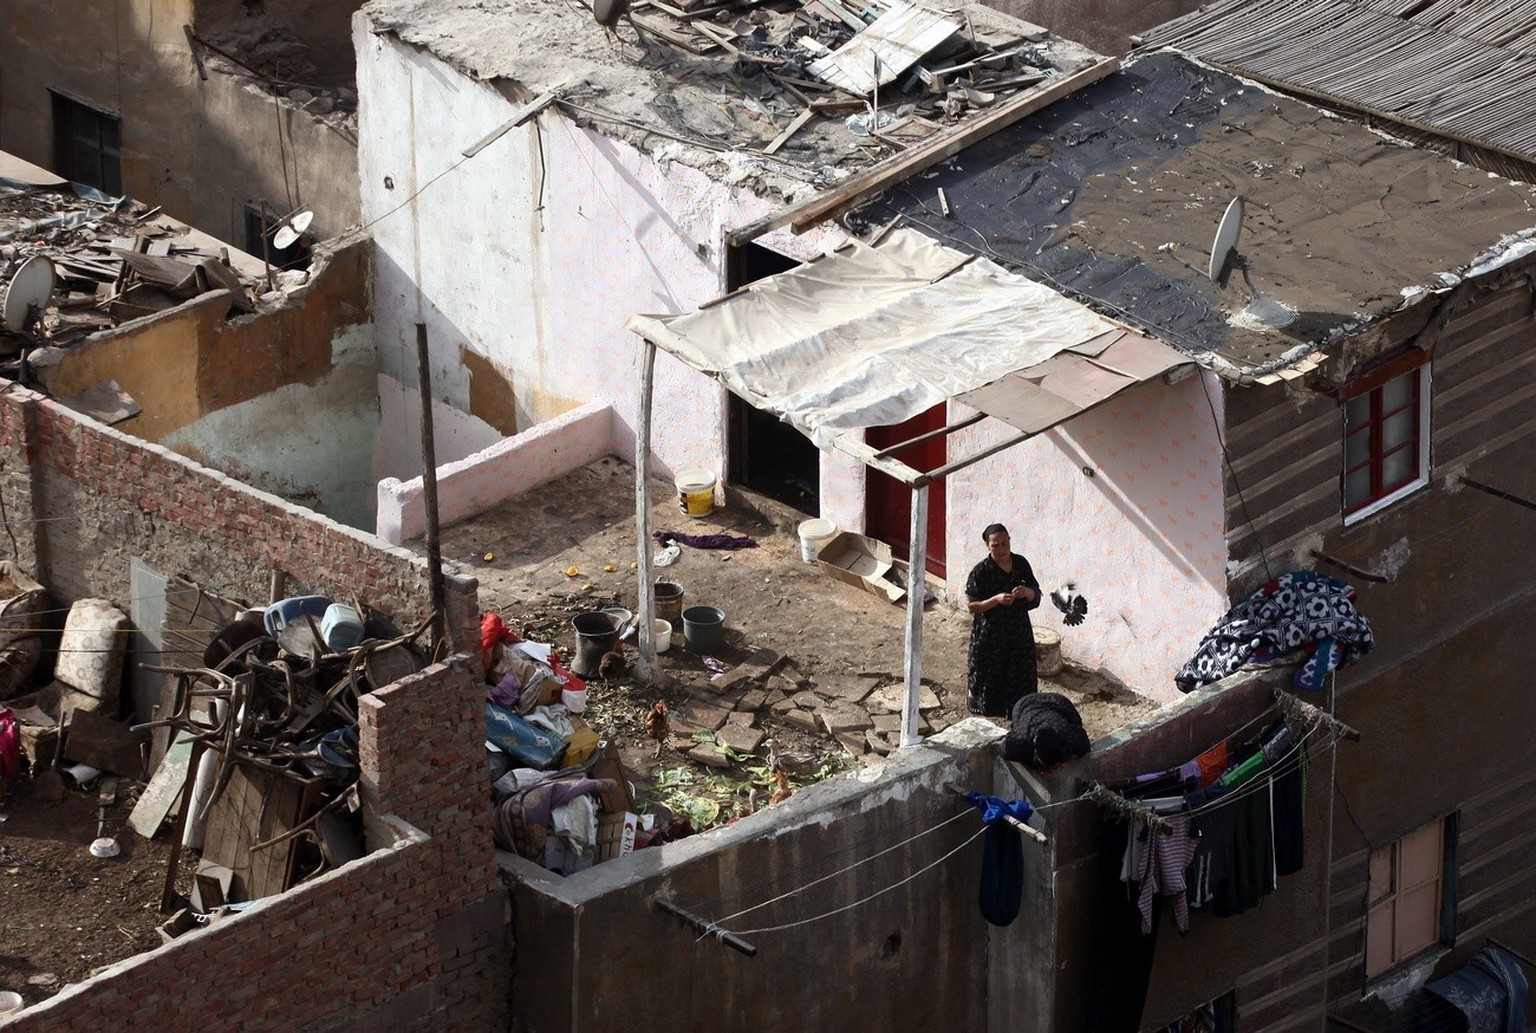 epa03584511 A woman looks from her balcony in the slum residents Ramlet Bulaq&#039;s in Cairo, Egypt, 14 February 2013. Ramlet Bulaq&#039;s residents live in run-down shacks and lack basic facilities, ...